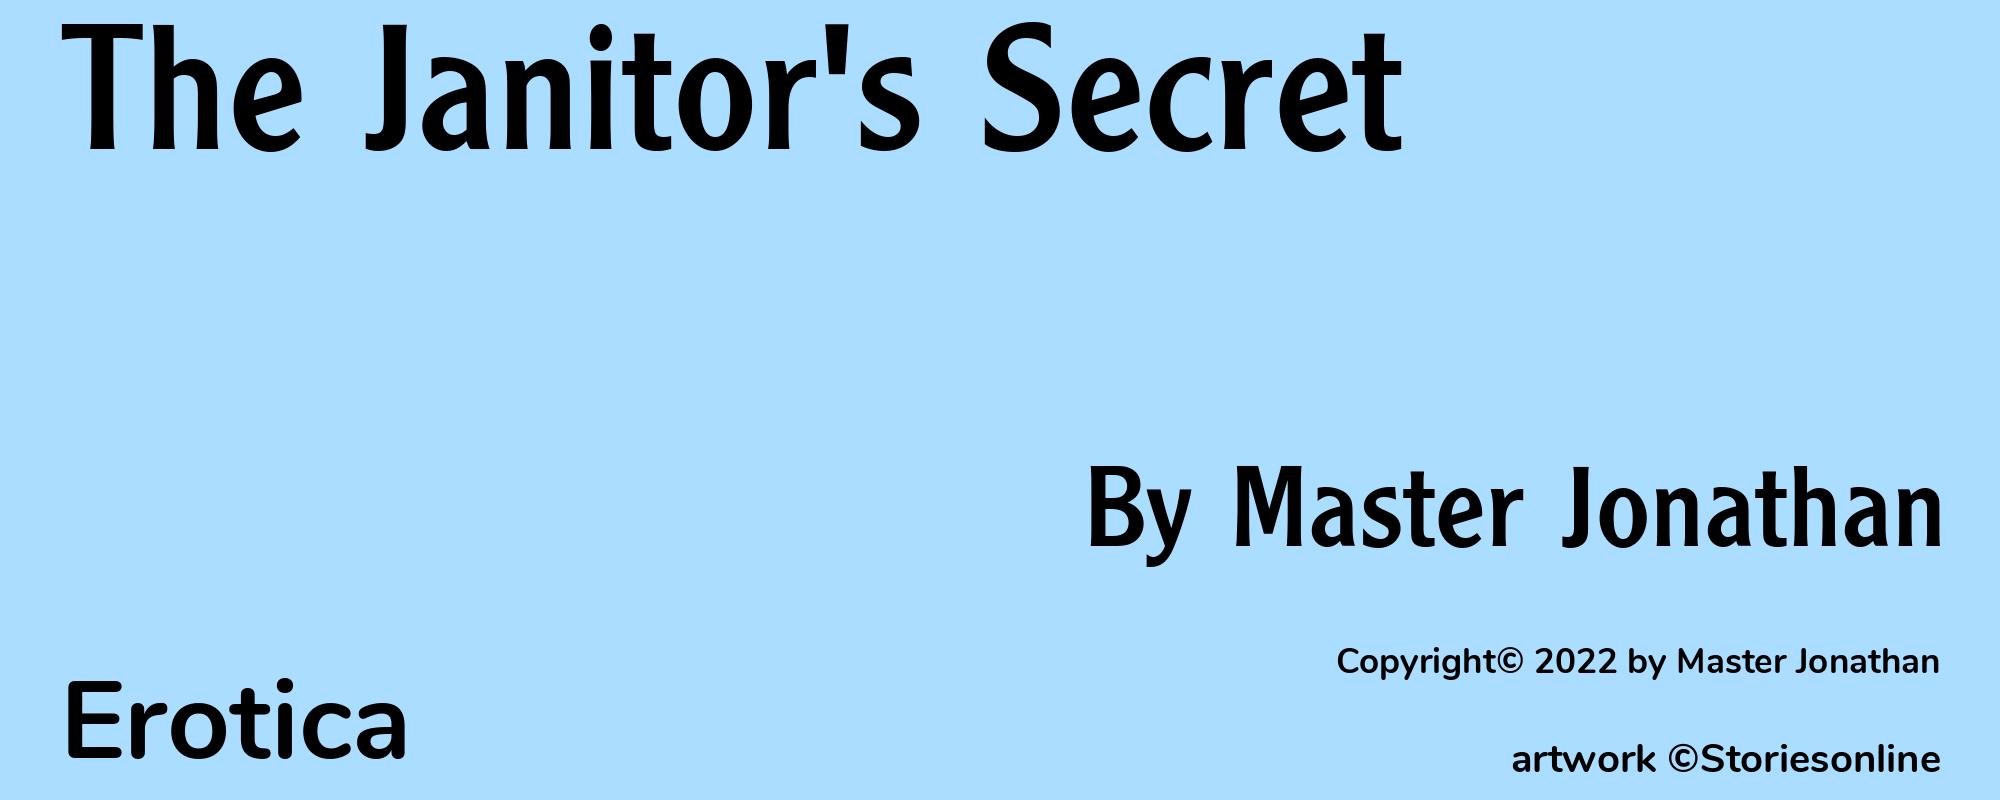 The Janitor's Secret - Cover